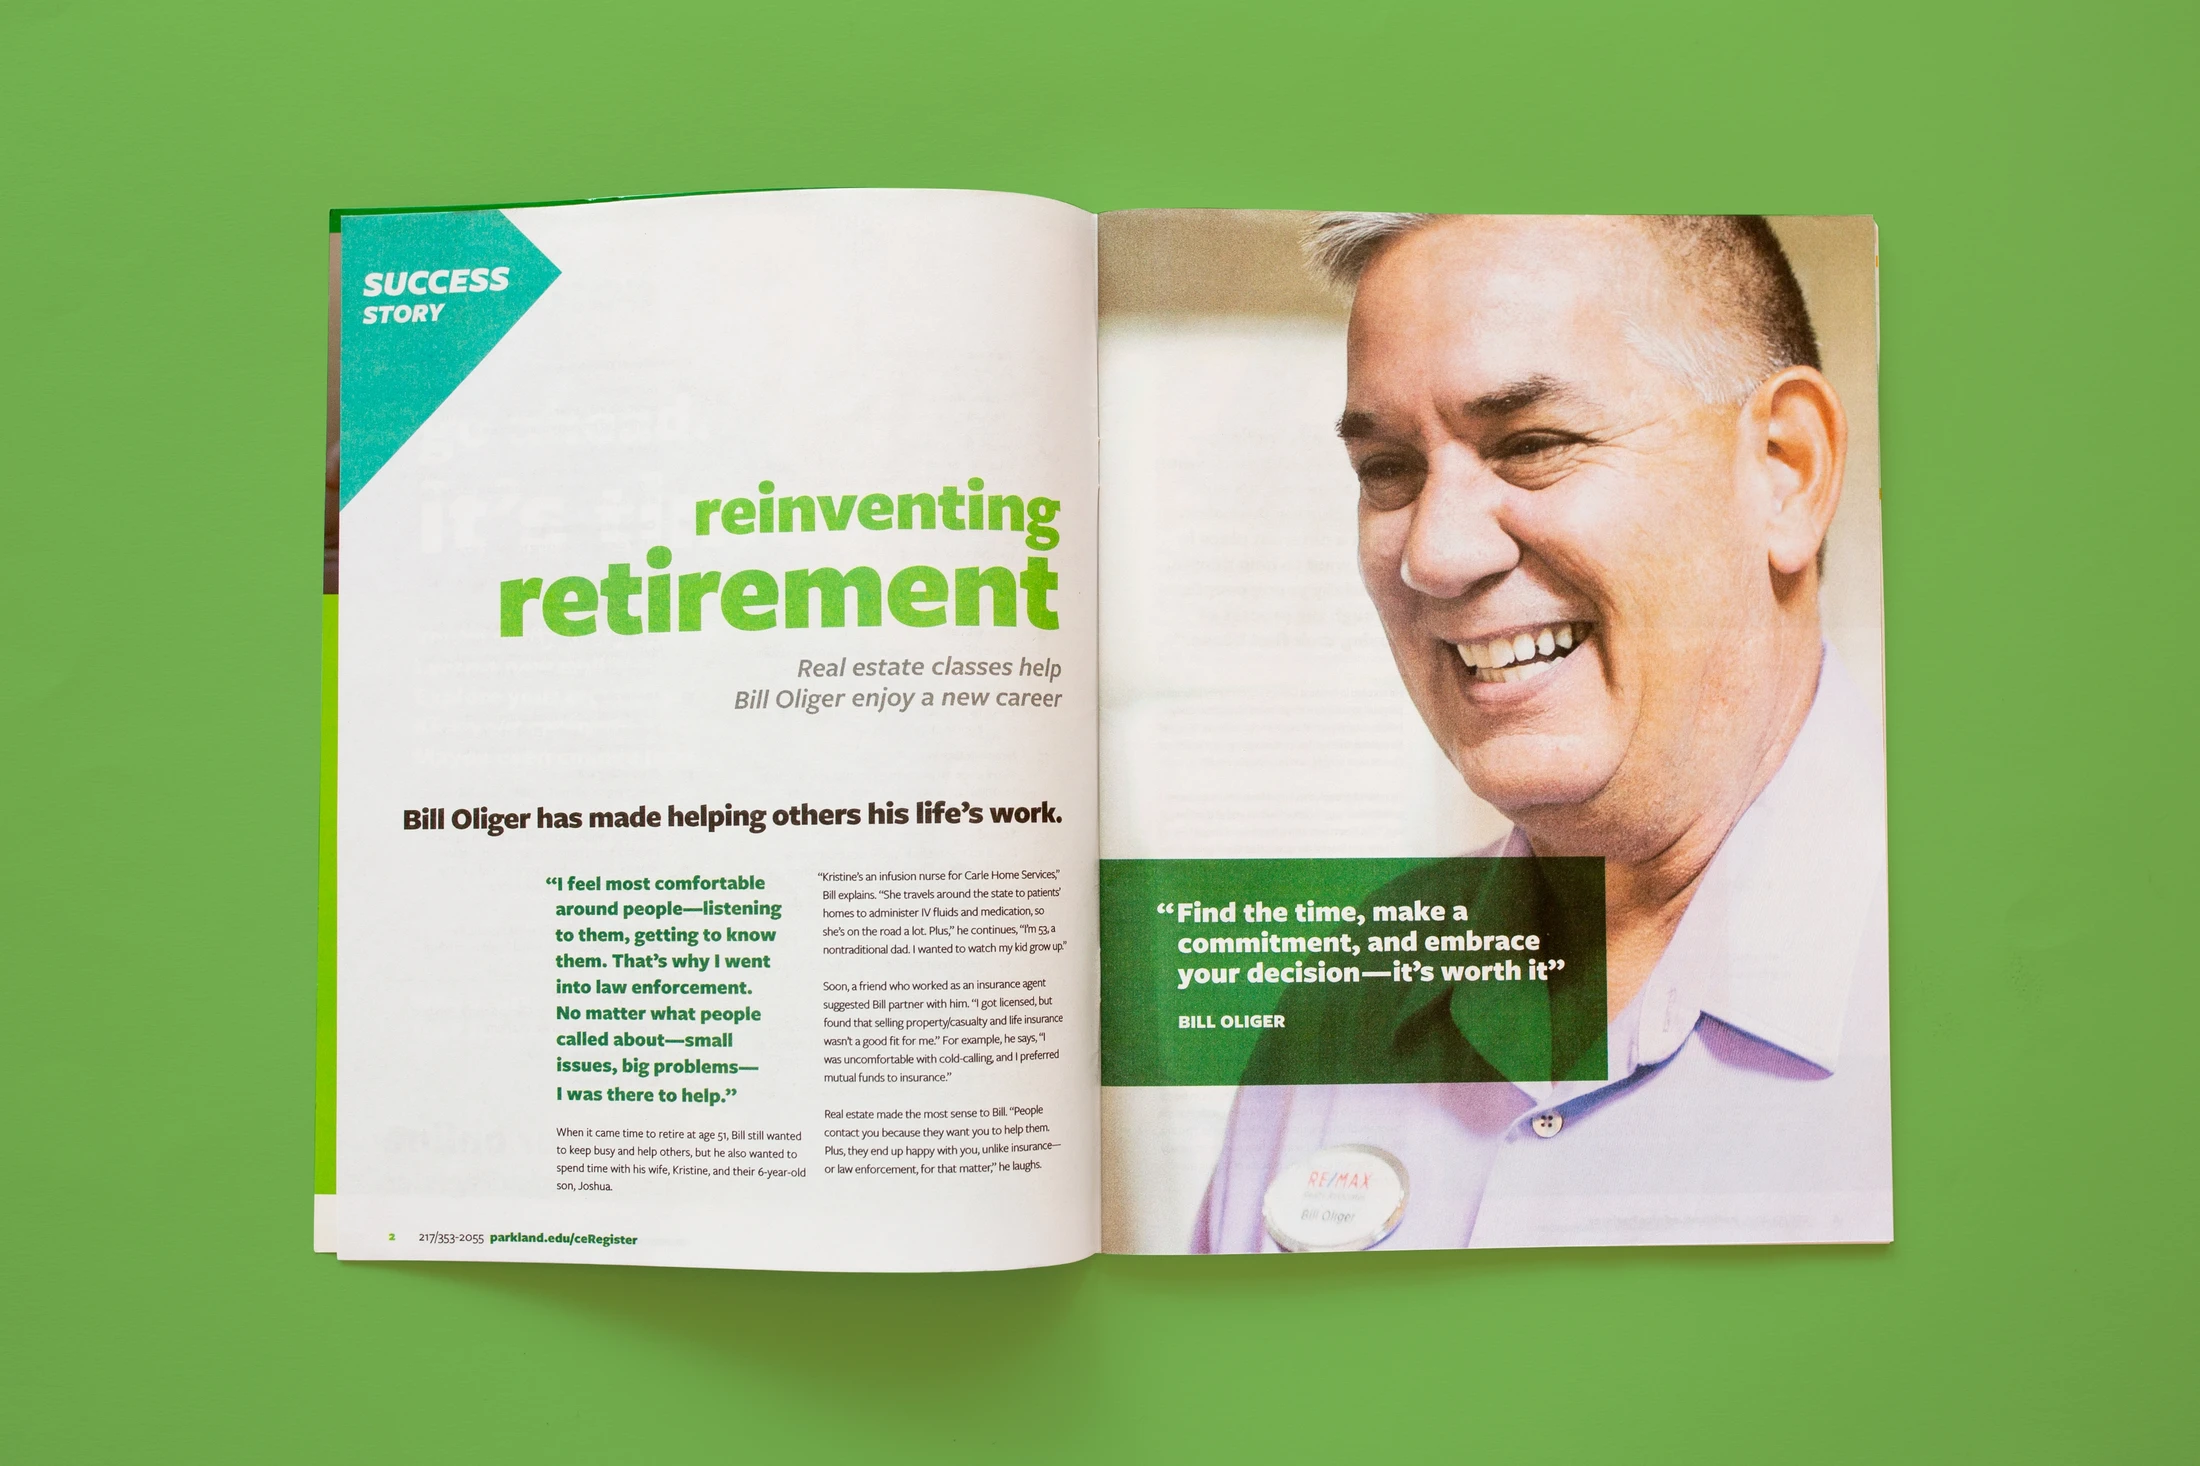 A magazine with an image of a man smiling on a green background.